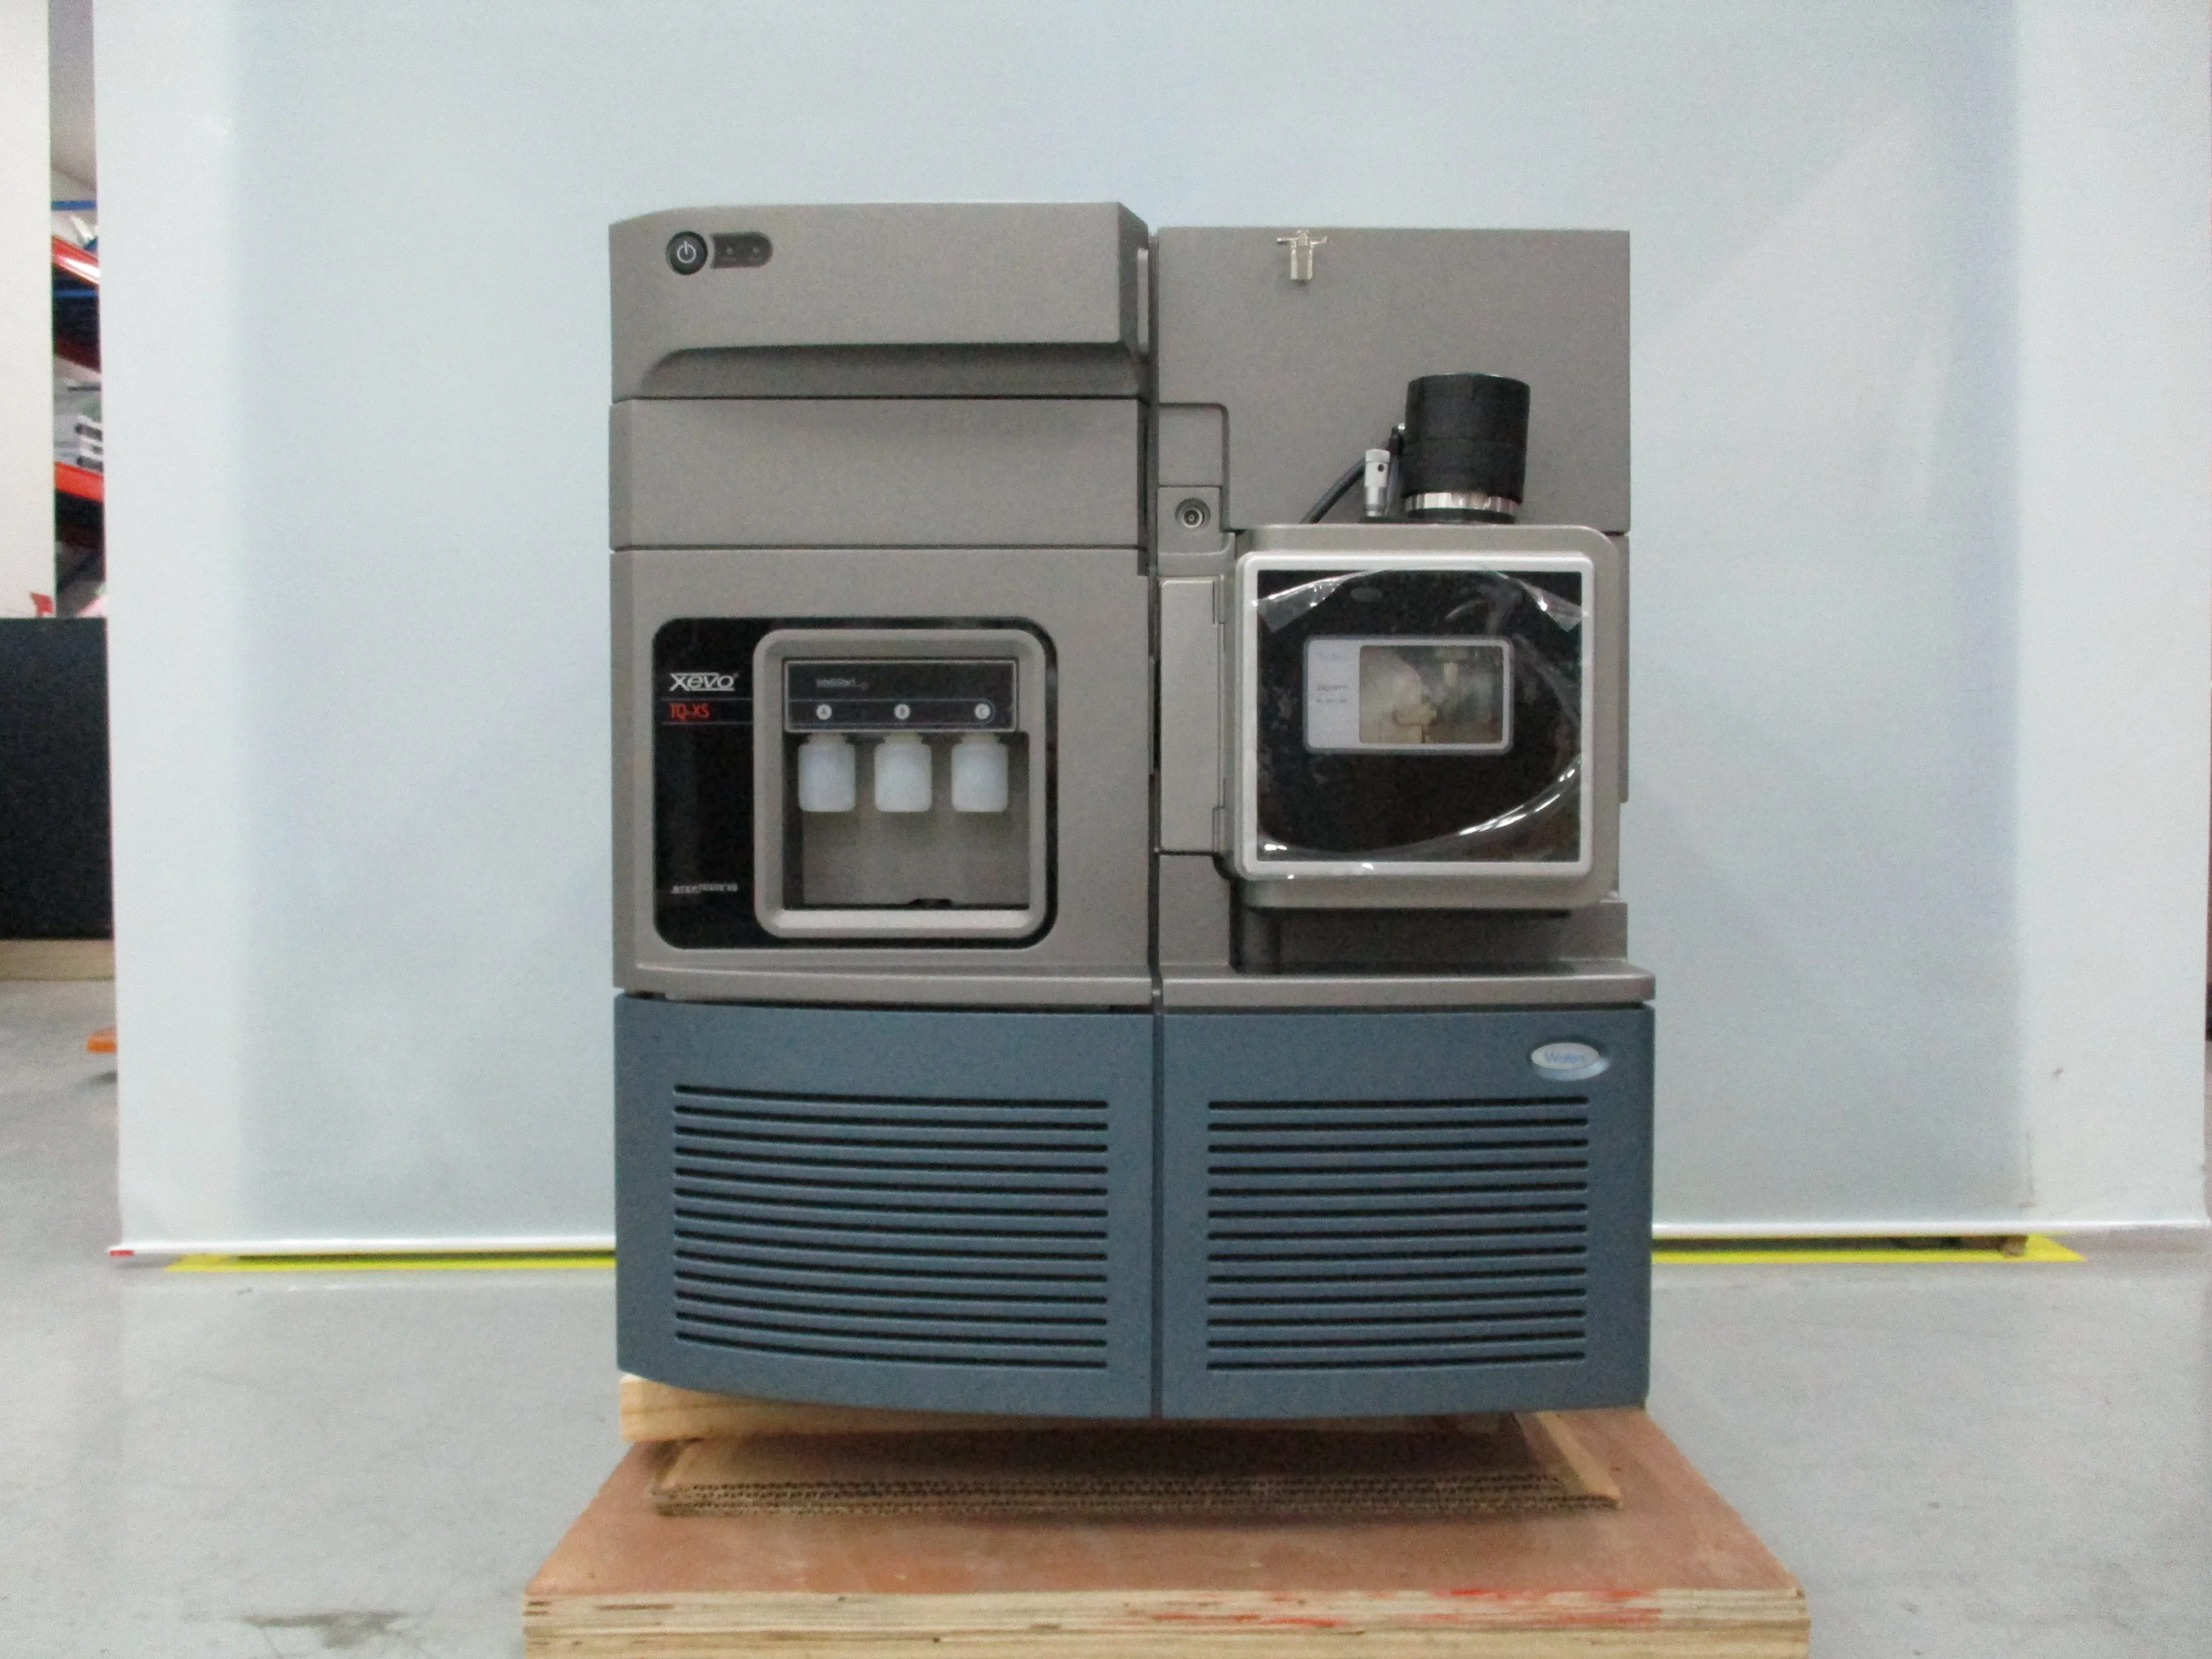 Waters LC/MS/MS Xevo TQ-XS with I-Class UPLC